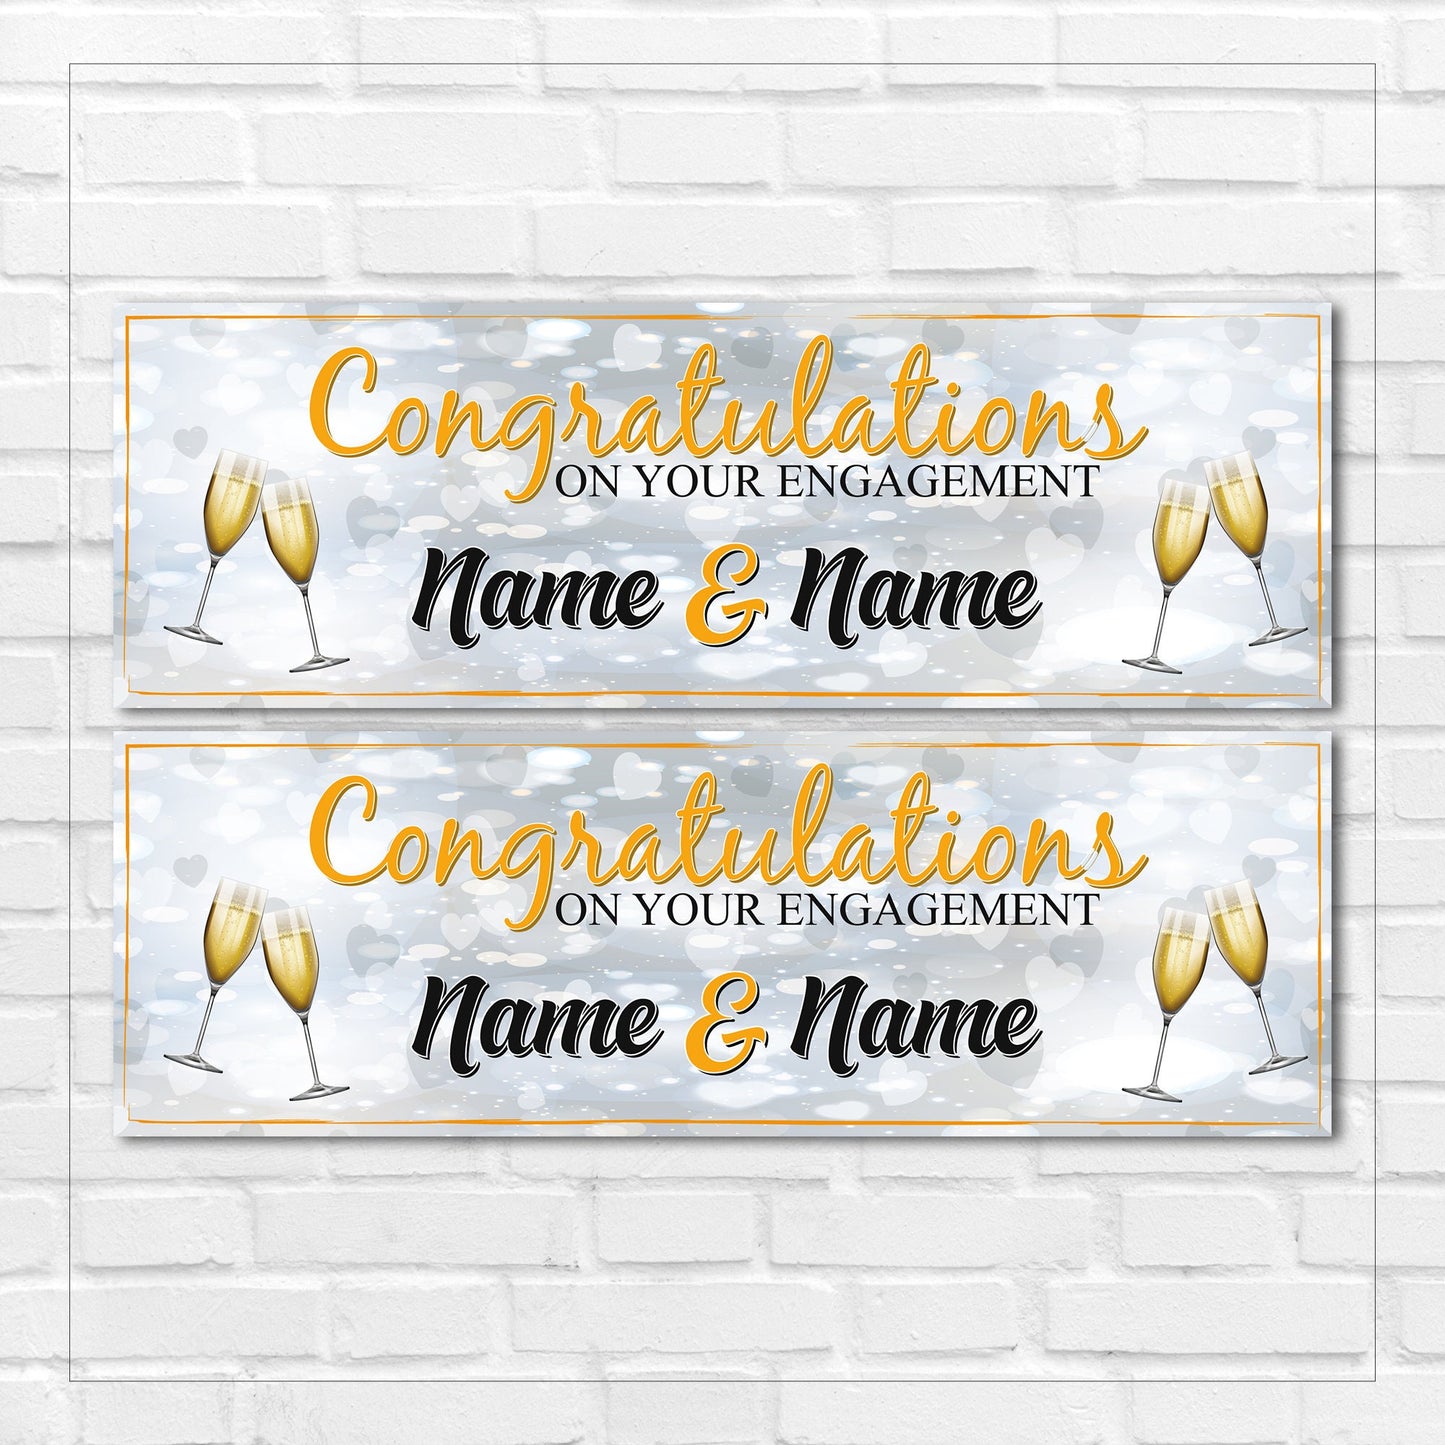 Set of 2 Personalised Engagement Banners - Congratulations On Your Engagement - Party - Celebration - Occasion BBAN-0244